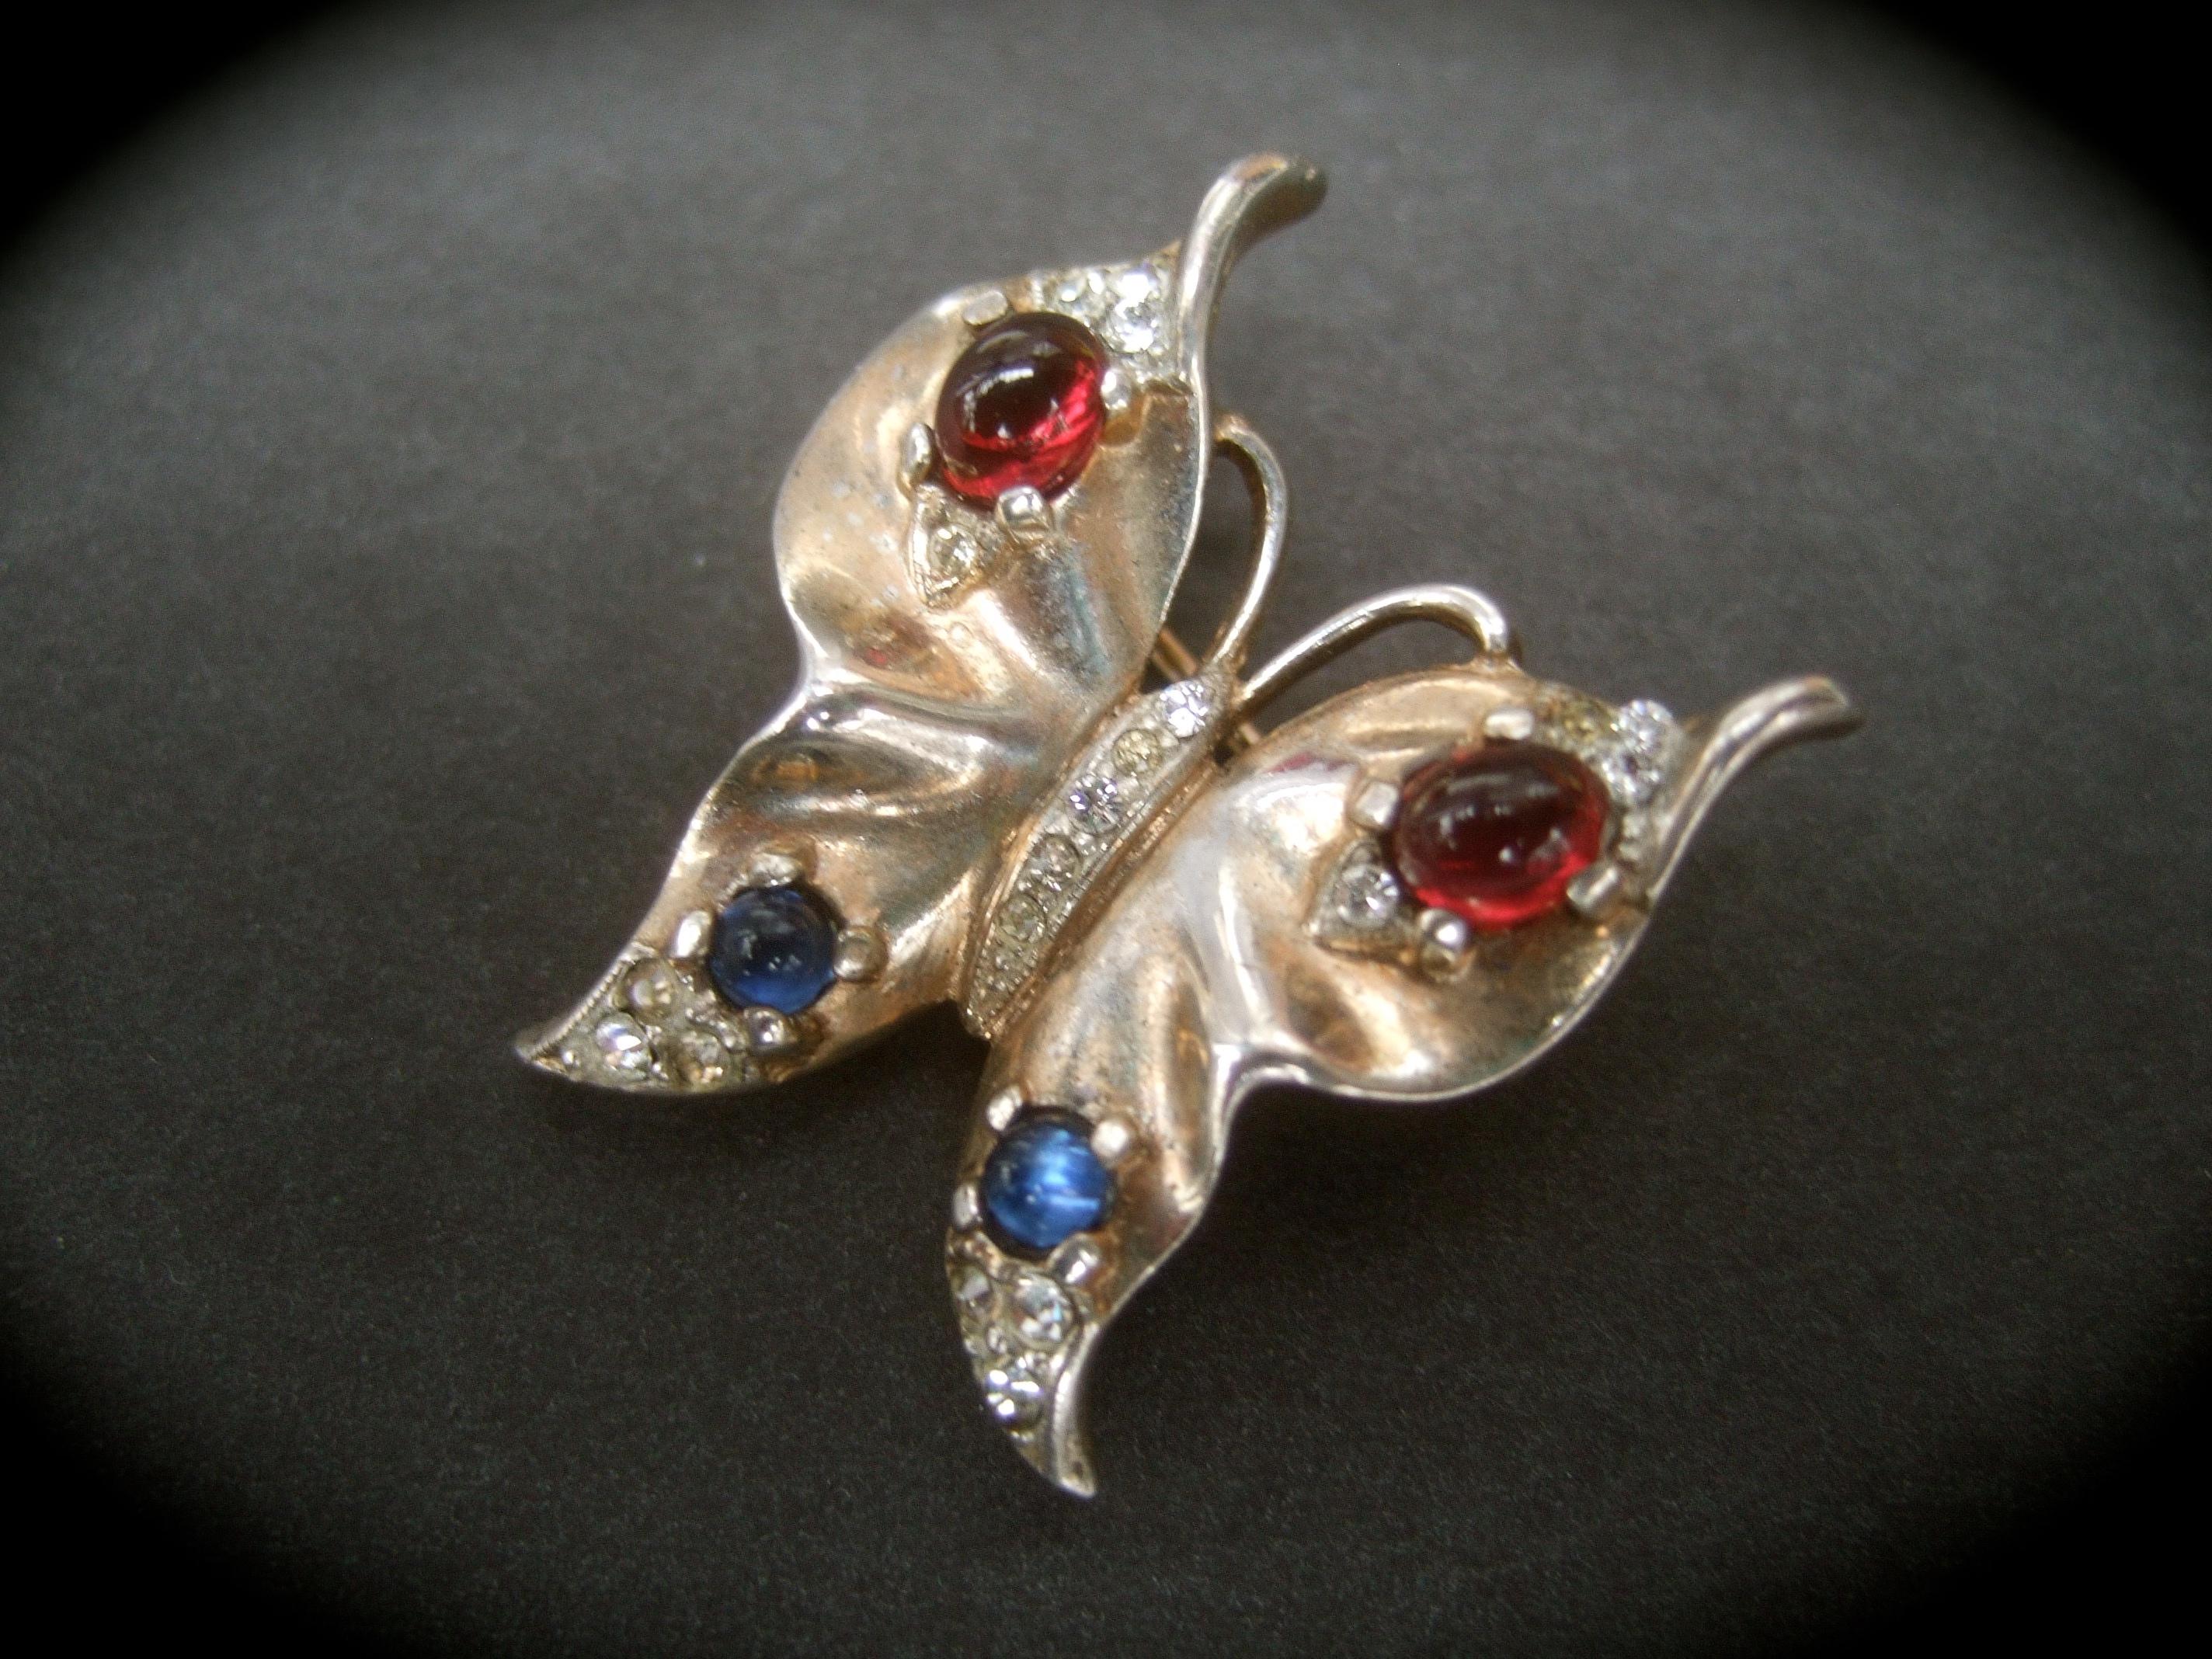 Trifari 1940s Sterling vermeil diminutive butterfly brooch 
The elegant small scale brooch is embellished with ruby color and sapphire blue glass cabochons 

Sheathed in gilt vermeil; accented with tiny clusters of diamante pave' crystals 
The